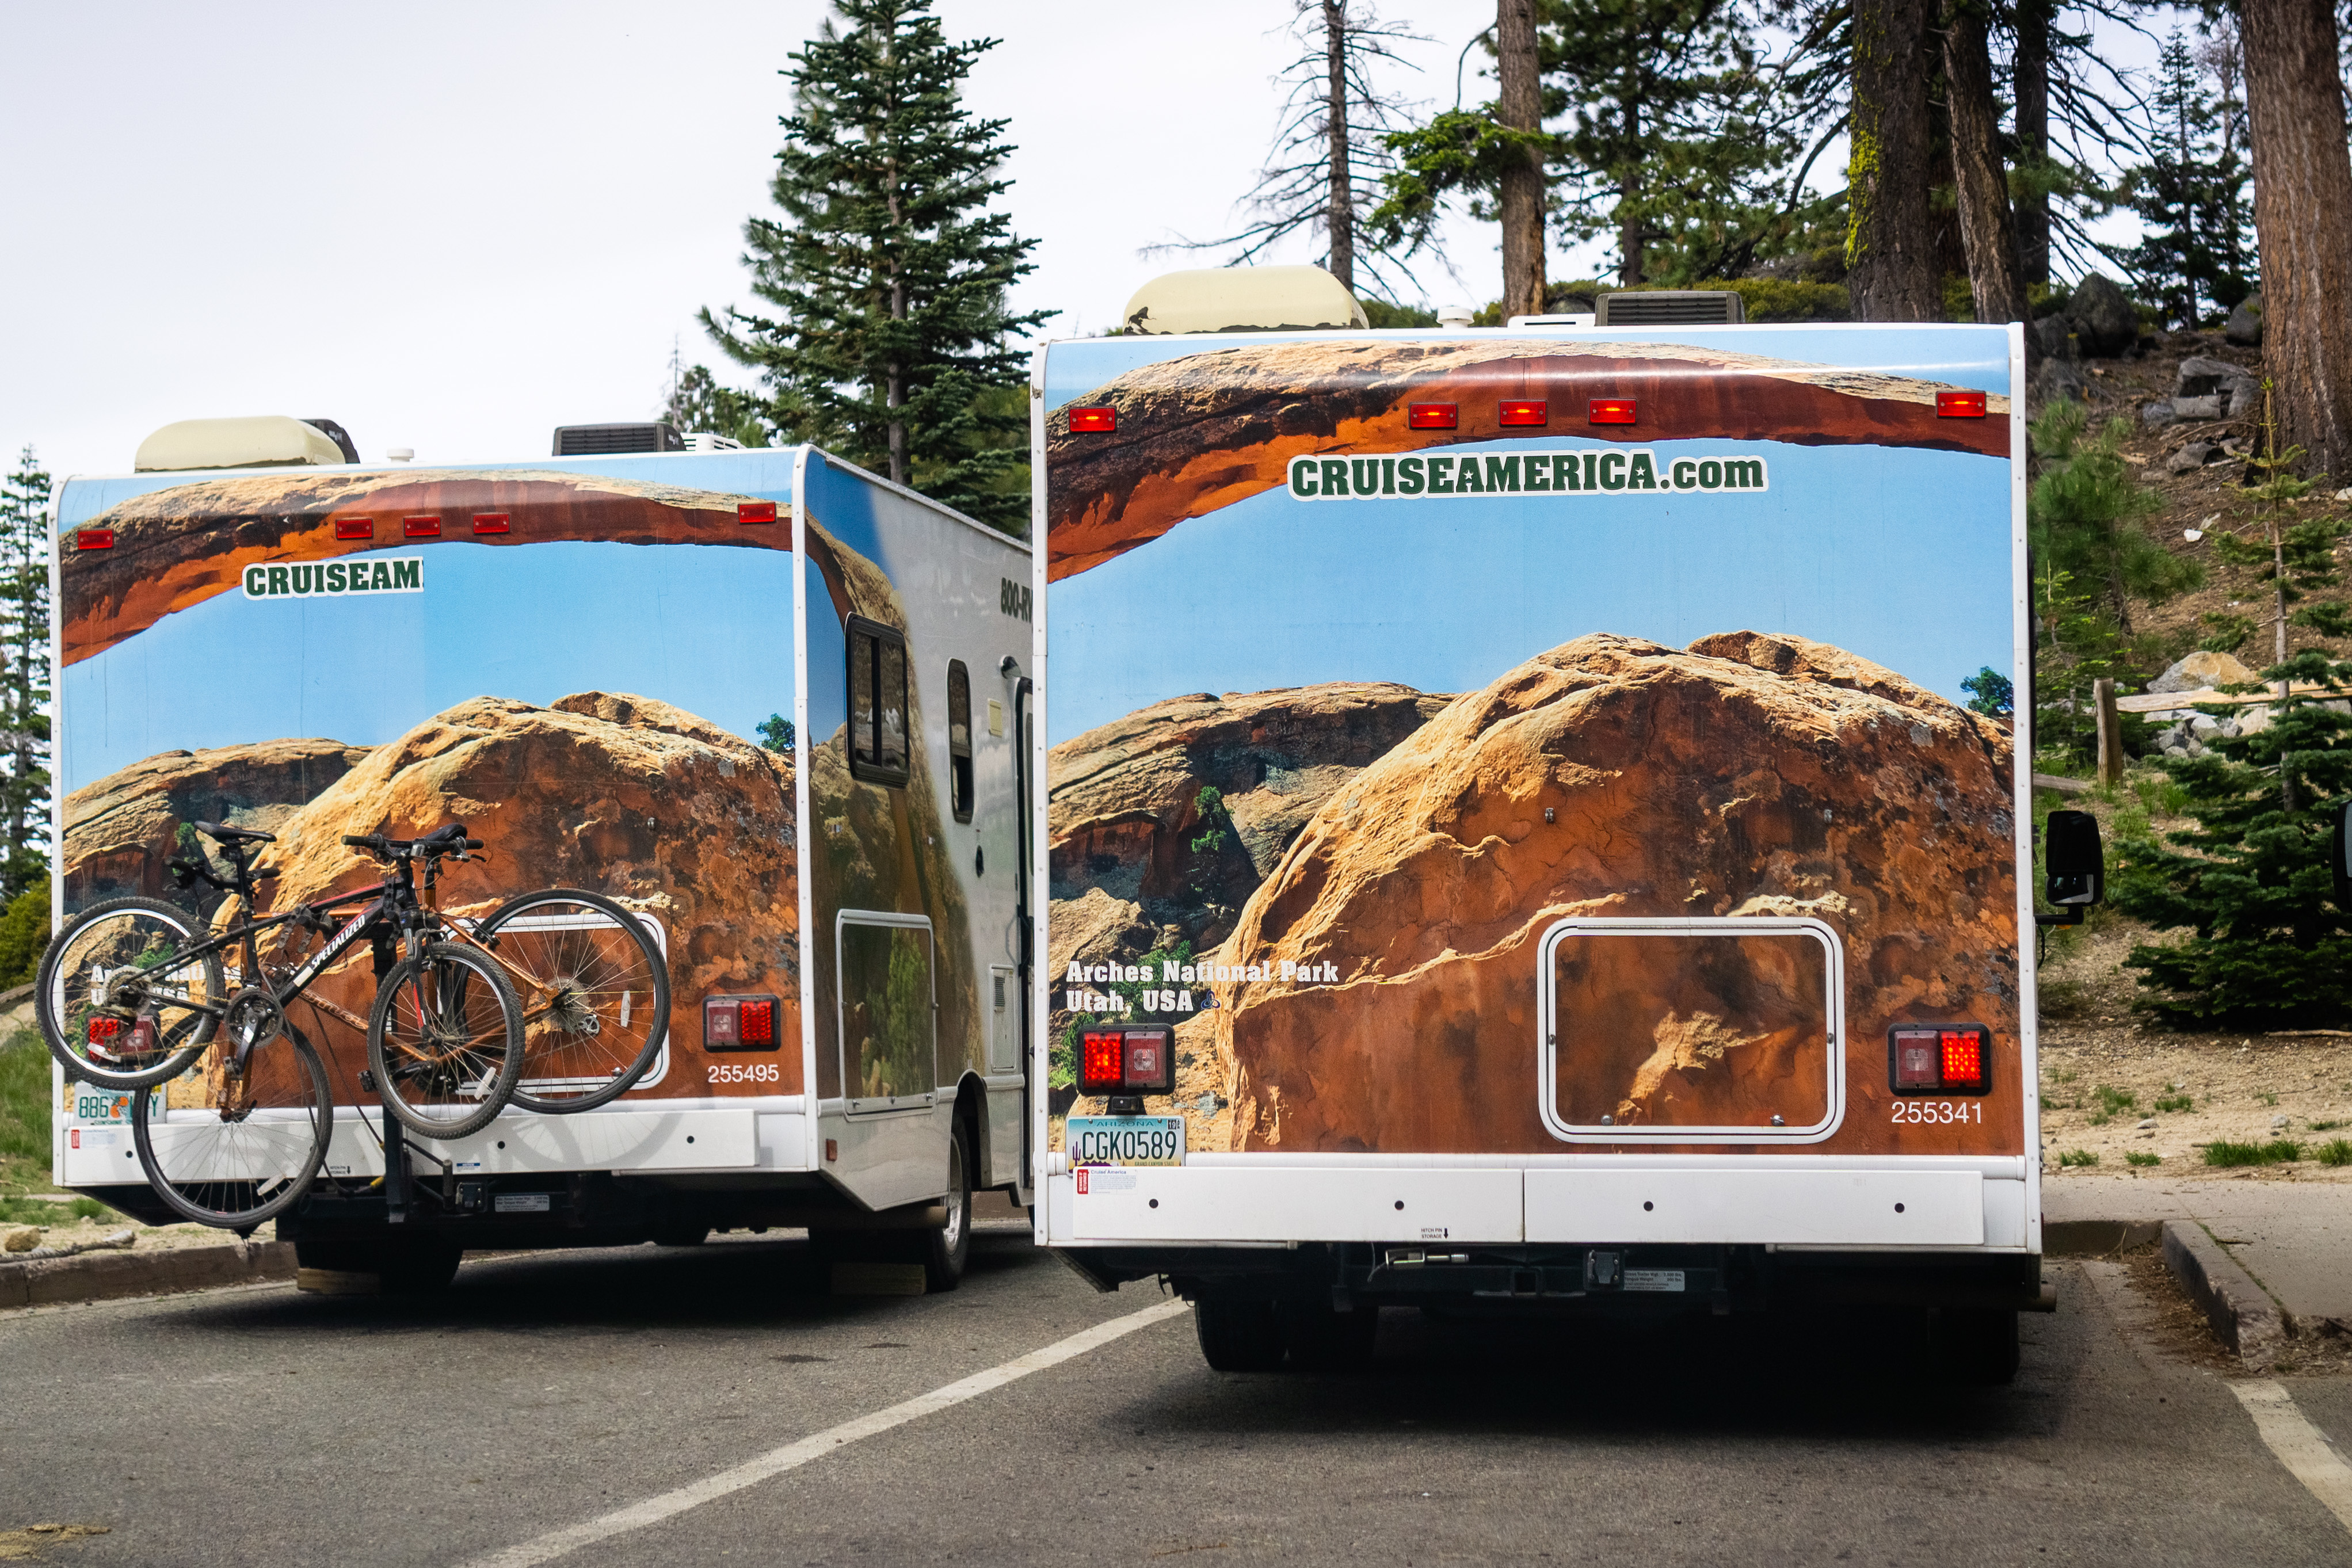 Two Cruise America RV rented RVs in parking lot of Yosemite National Park